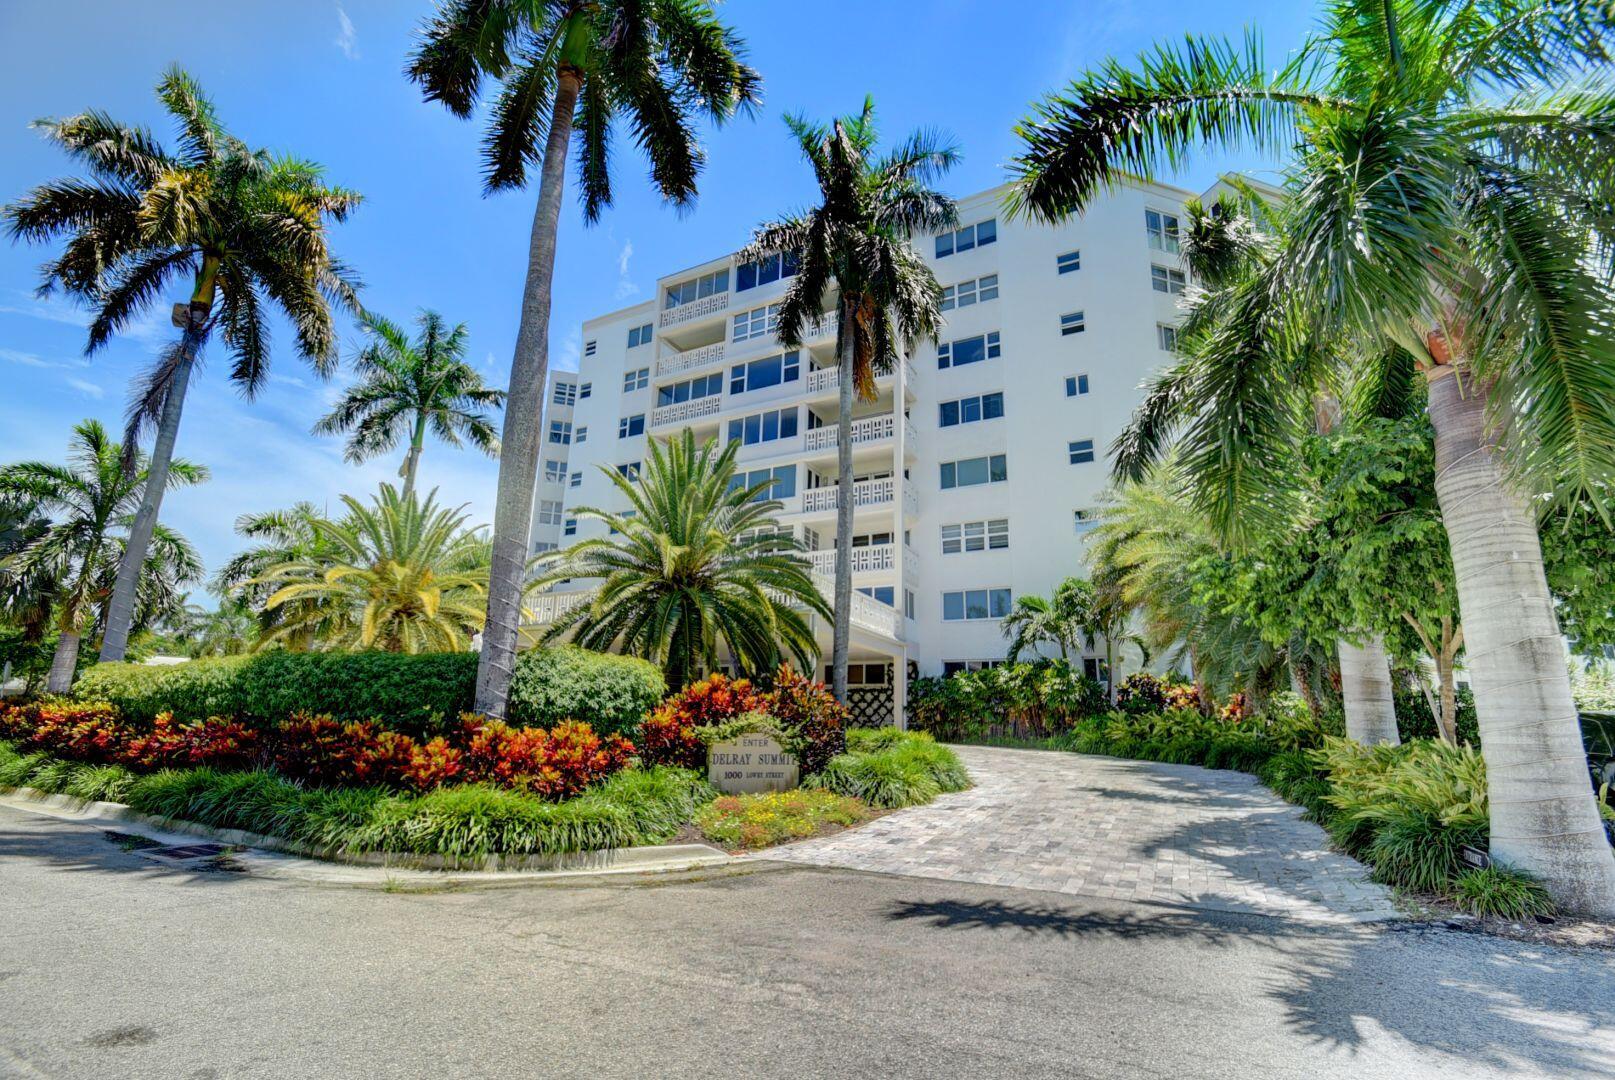 In the heart of the beach area and on the favored north side, the Delray Summit is in the prime location to enjoy the best of the Florida lifestyle. This renovated high floor corner unit boasts sweeping intracoastal, city and ocean views from all living areas.  The enclosed wrap balcony provides additional living space. Once home, you can park your car and walk to vibrant Atlantic Ave. where there is an abundance of options for dining/ entertaining/shopping or take a short stroll to the wide, life guarded beach. The complex sits on more than two acres of lush tropical plantings. Watch the daily boat and manatee parade from the private on-site dock or grill and chill in the lovely picnic area or the new gazebo. It's a wonderful opportunity to own in Delray's best location. All ages welcome.